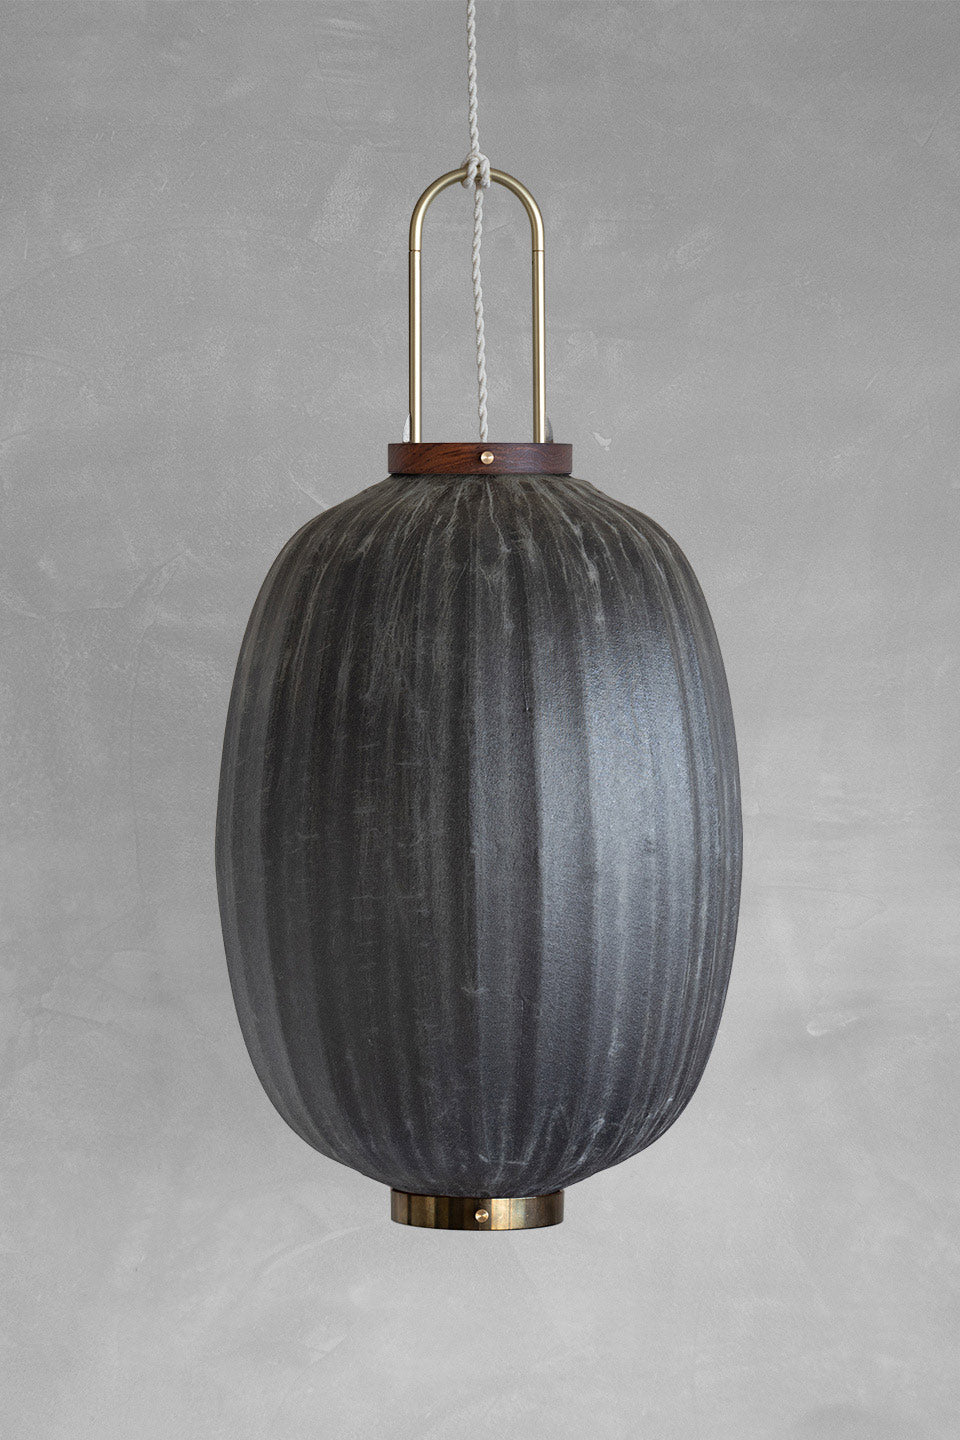 The Oval shaped version of the Heritage Lantern Black by Taiwan Lantern.